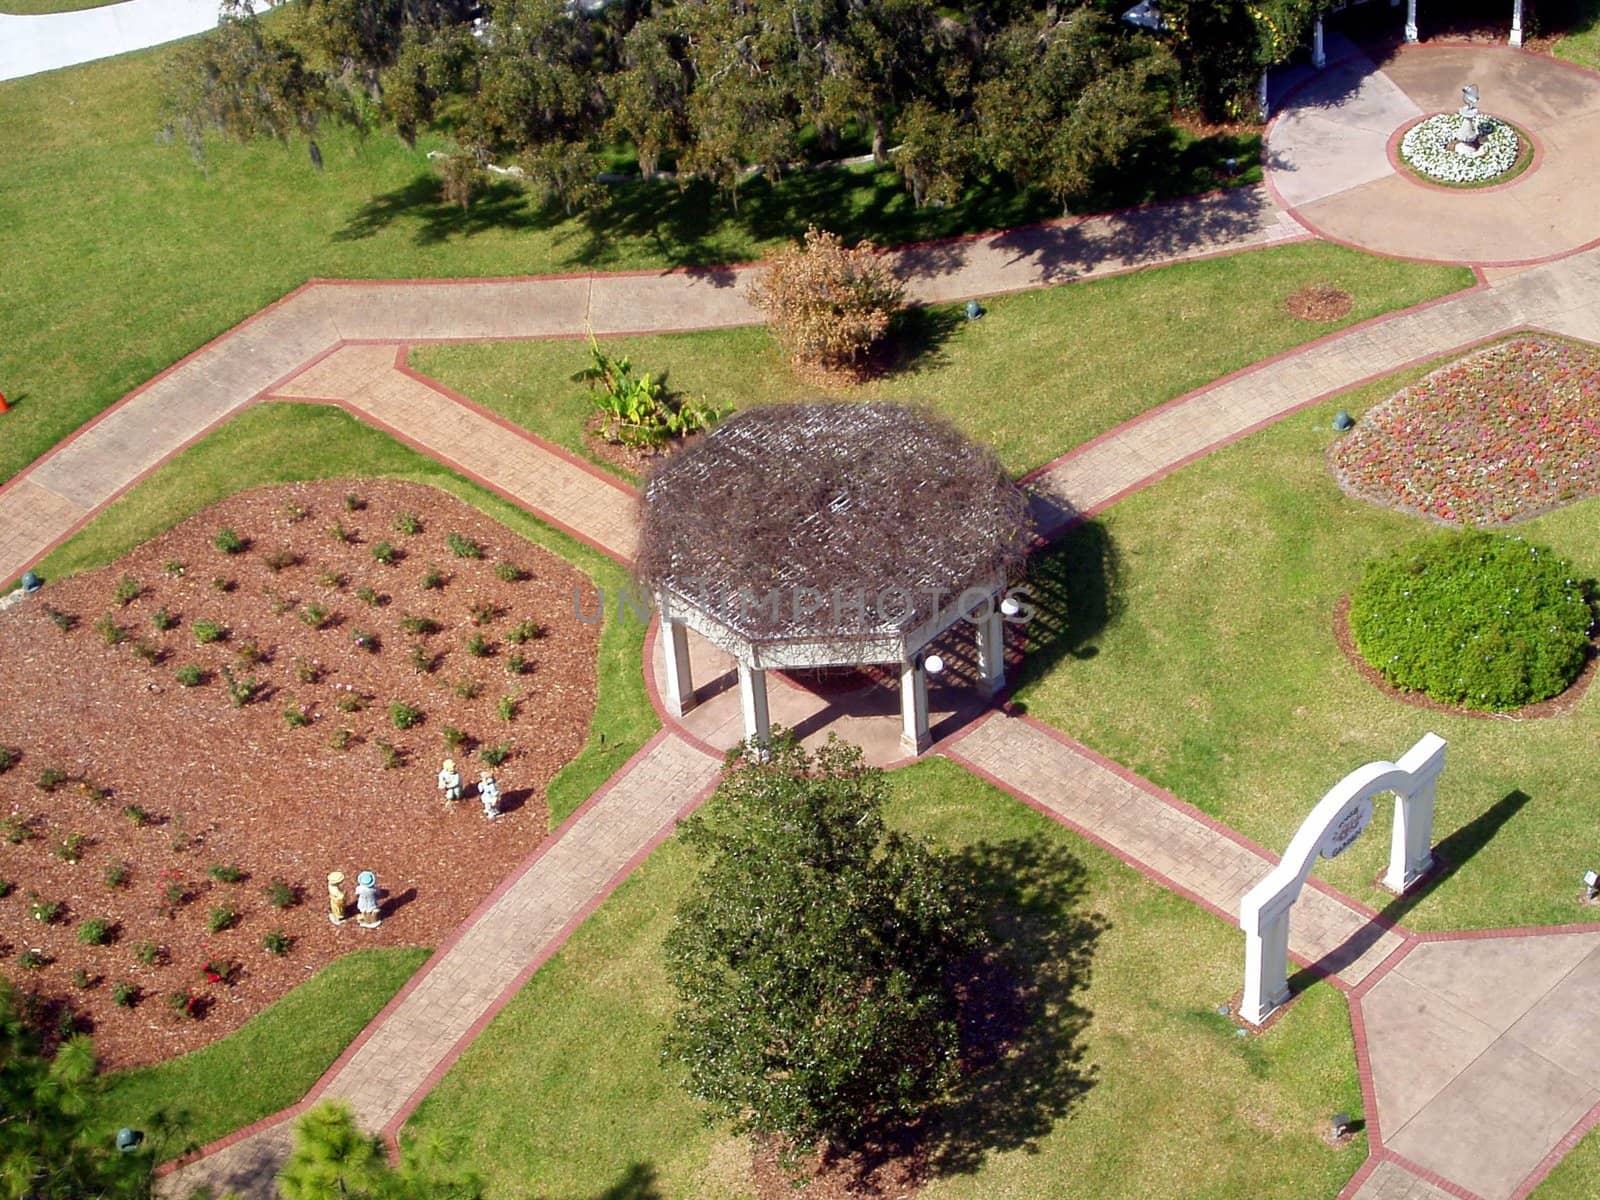 A garden from a view up above